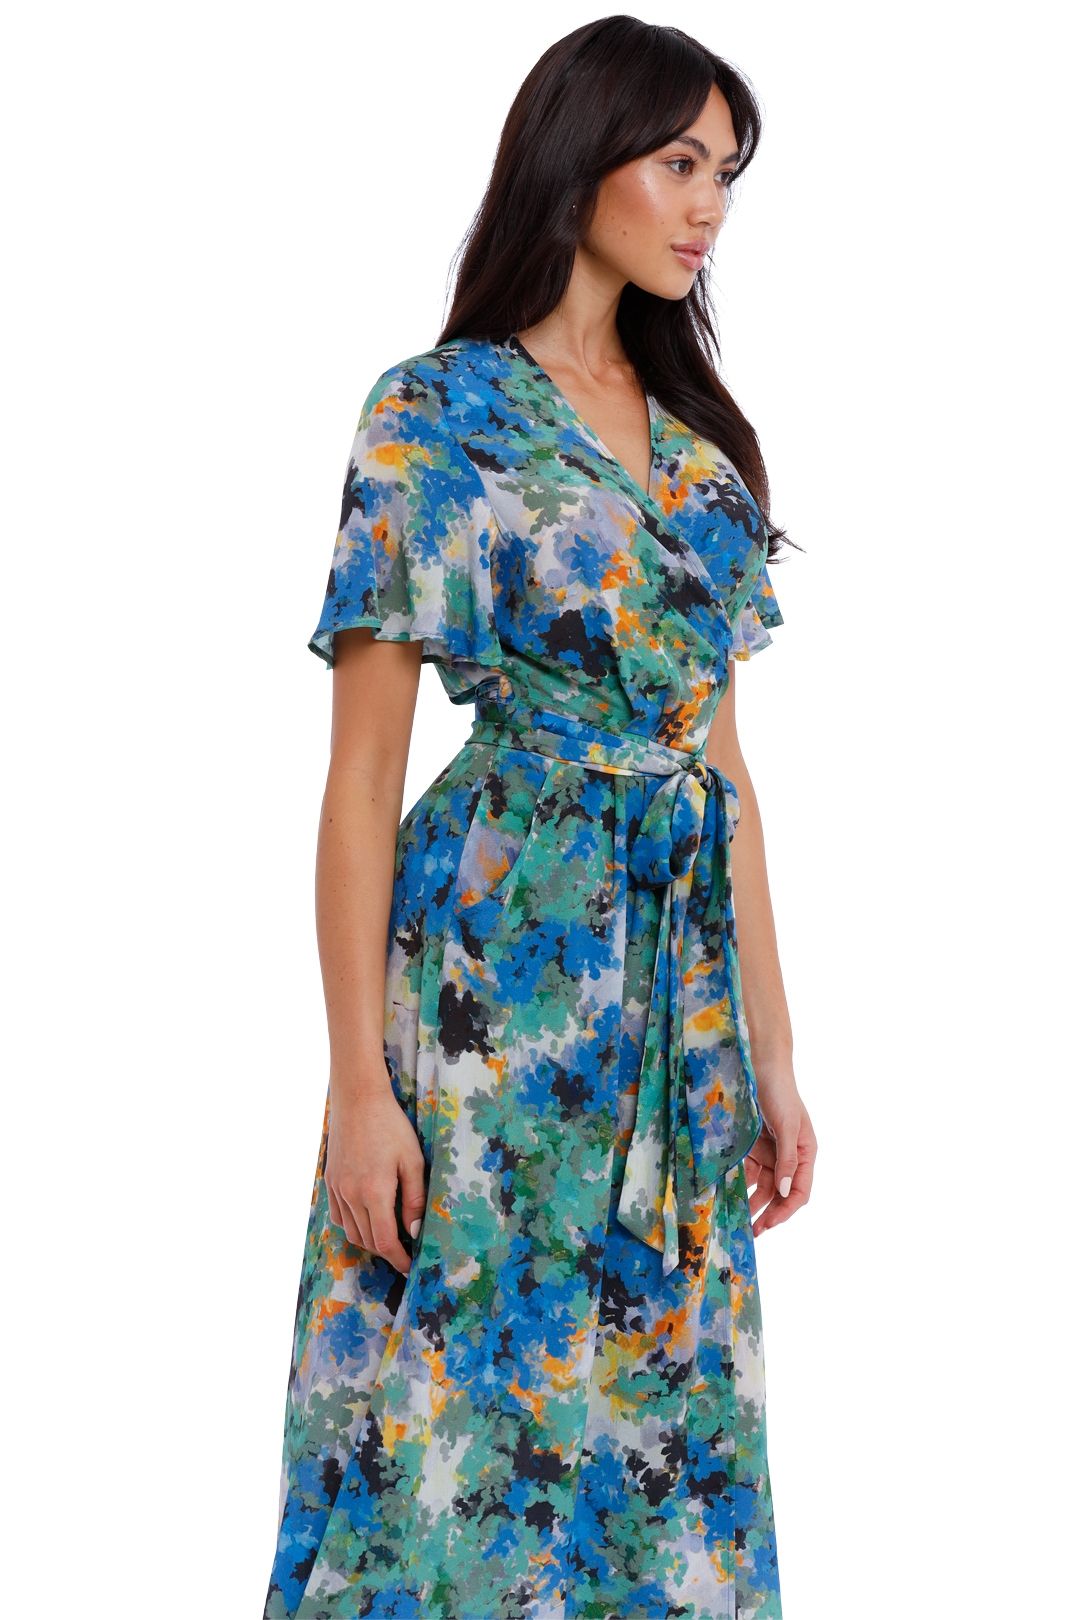 Kate Sylvester Meg Dress in Water Lilies